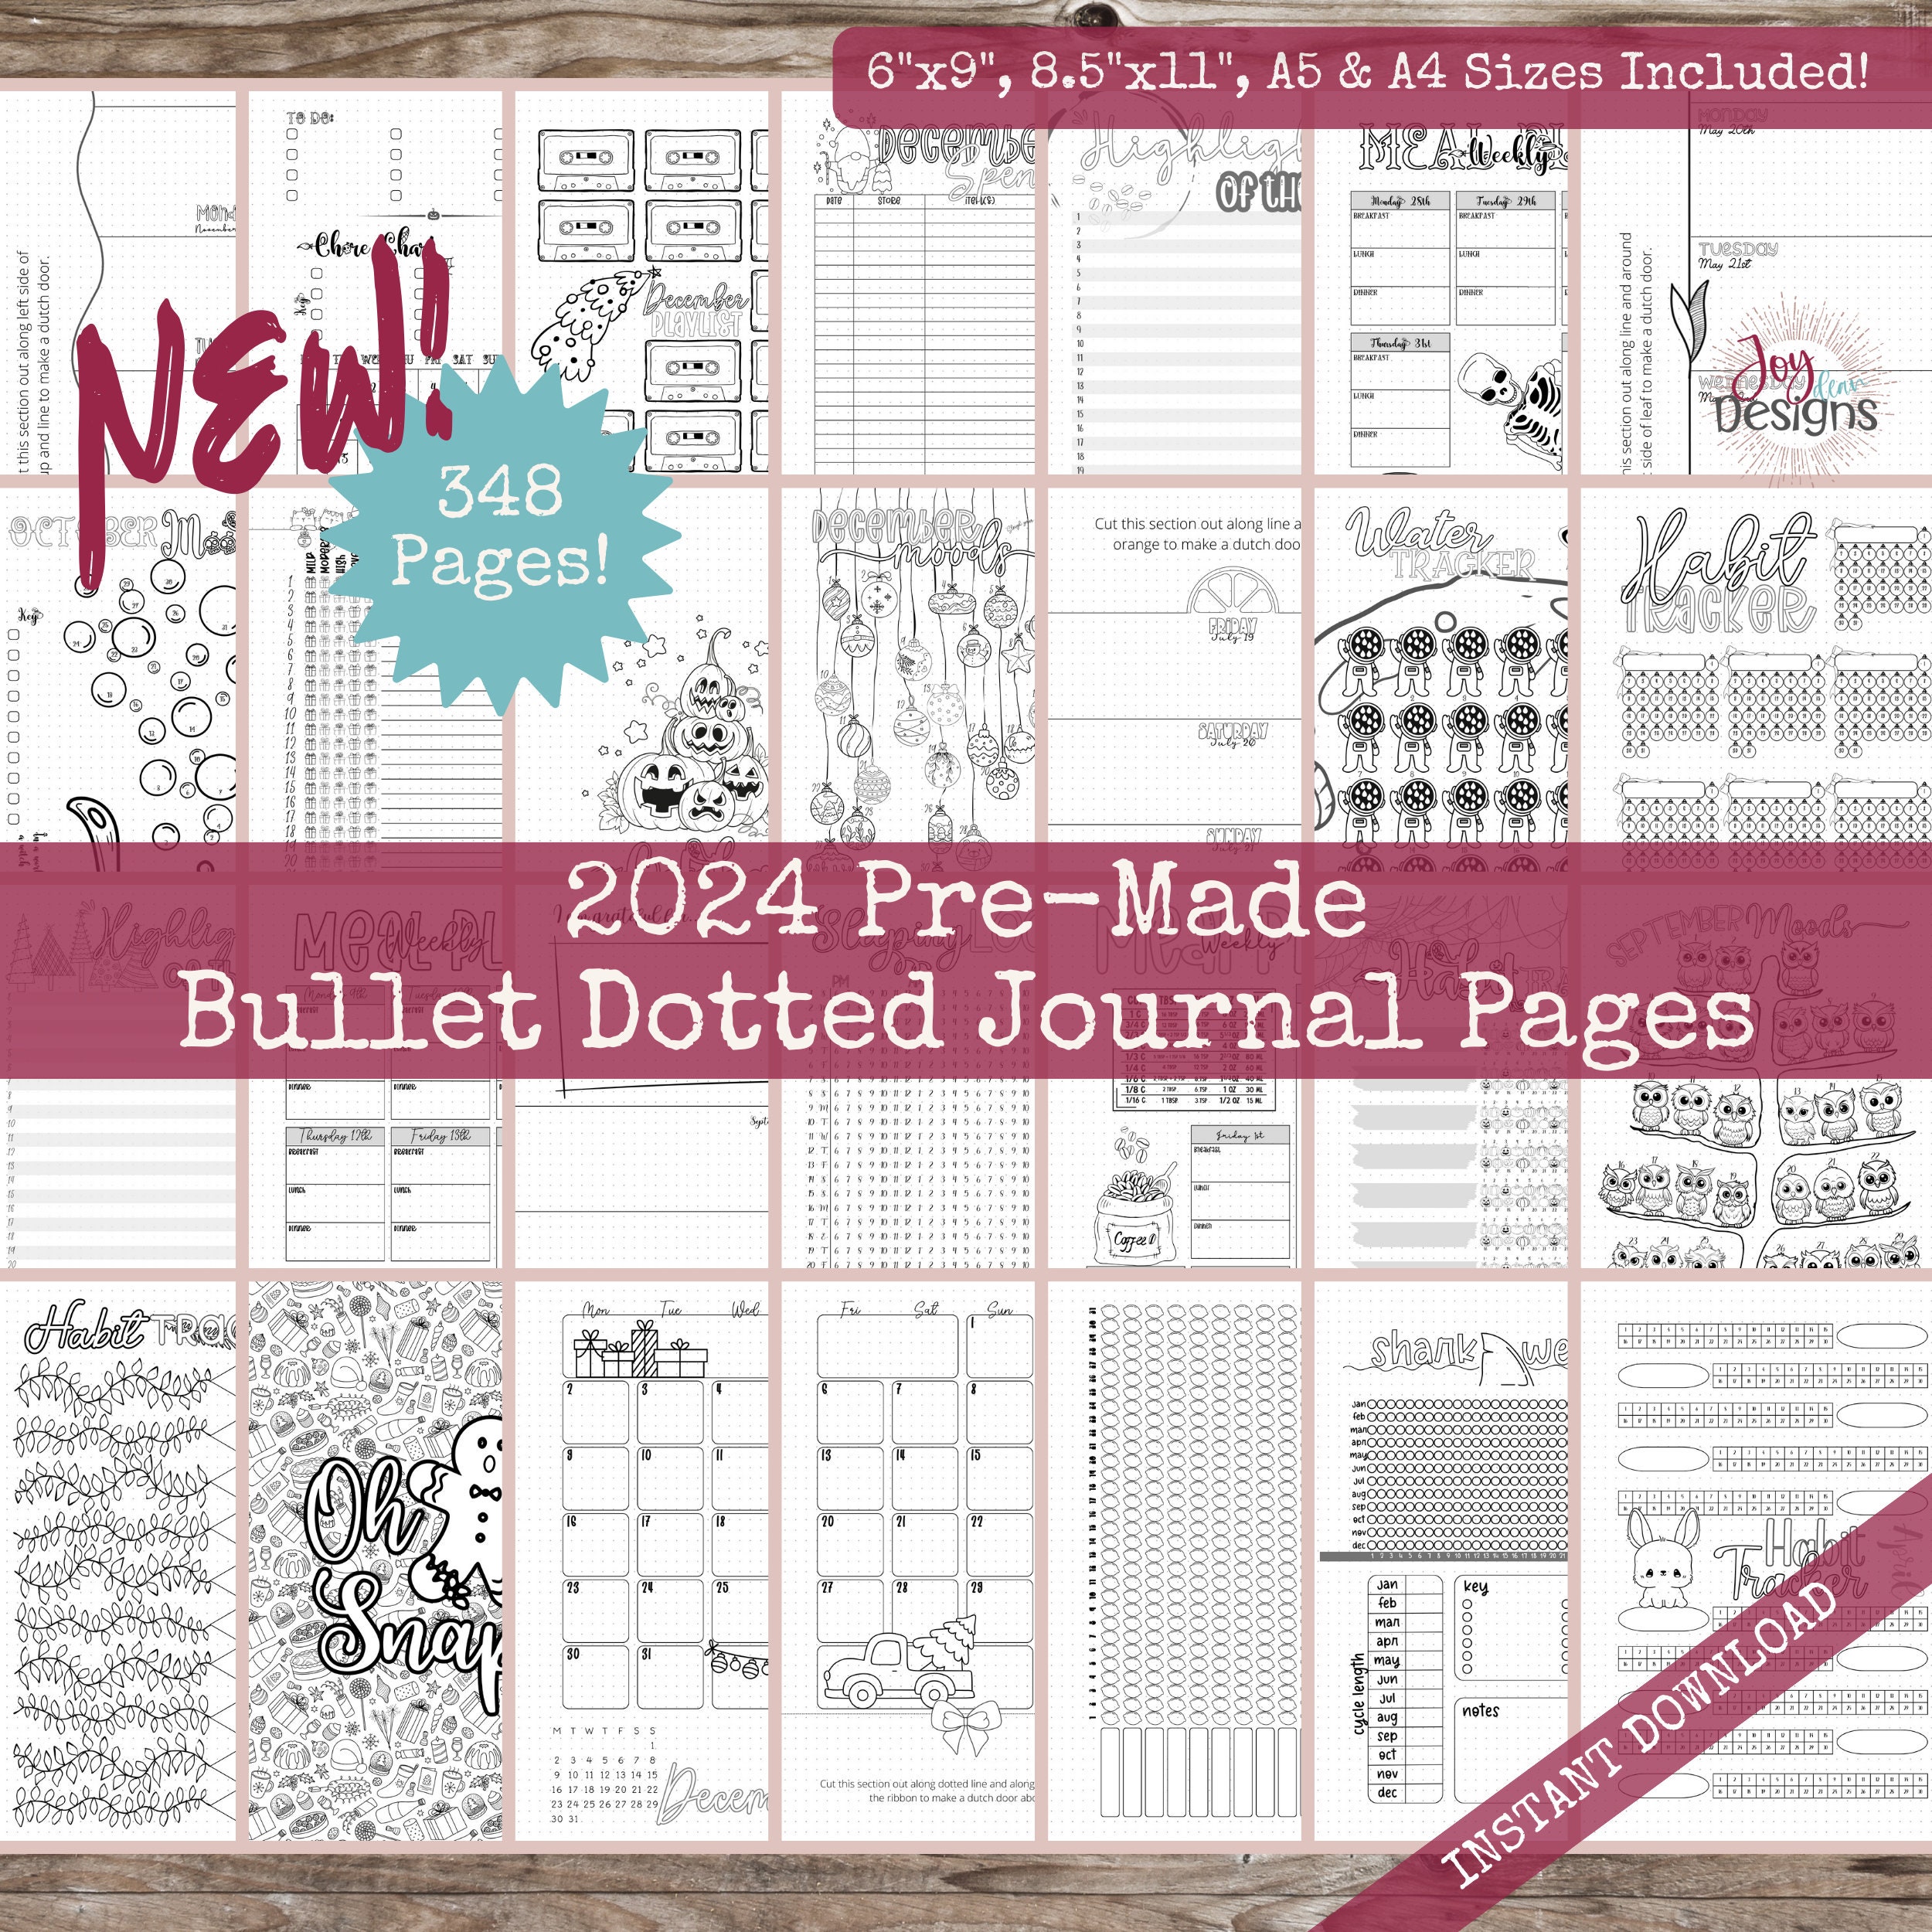 Premade Bullet Journal for Beginner 2024: Your ready-to-use monthly themed  dotted journal- personal organizer, habit tracker, gratitude journal